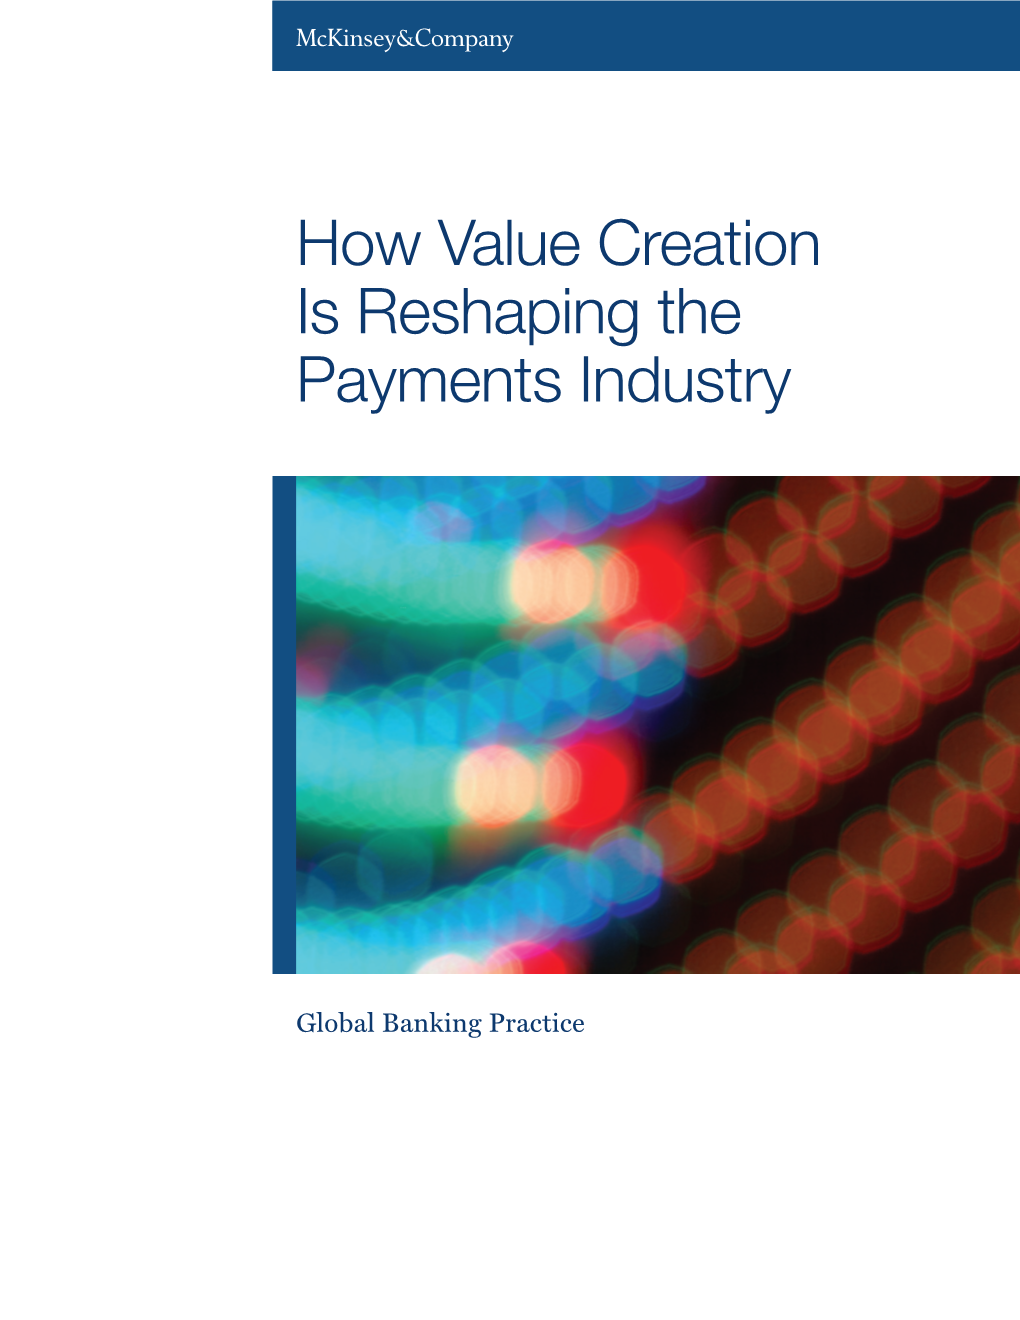 How Value Creation Is Reshaping the Payments Industry